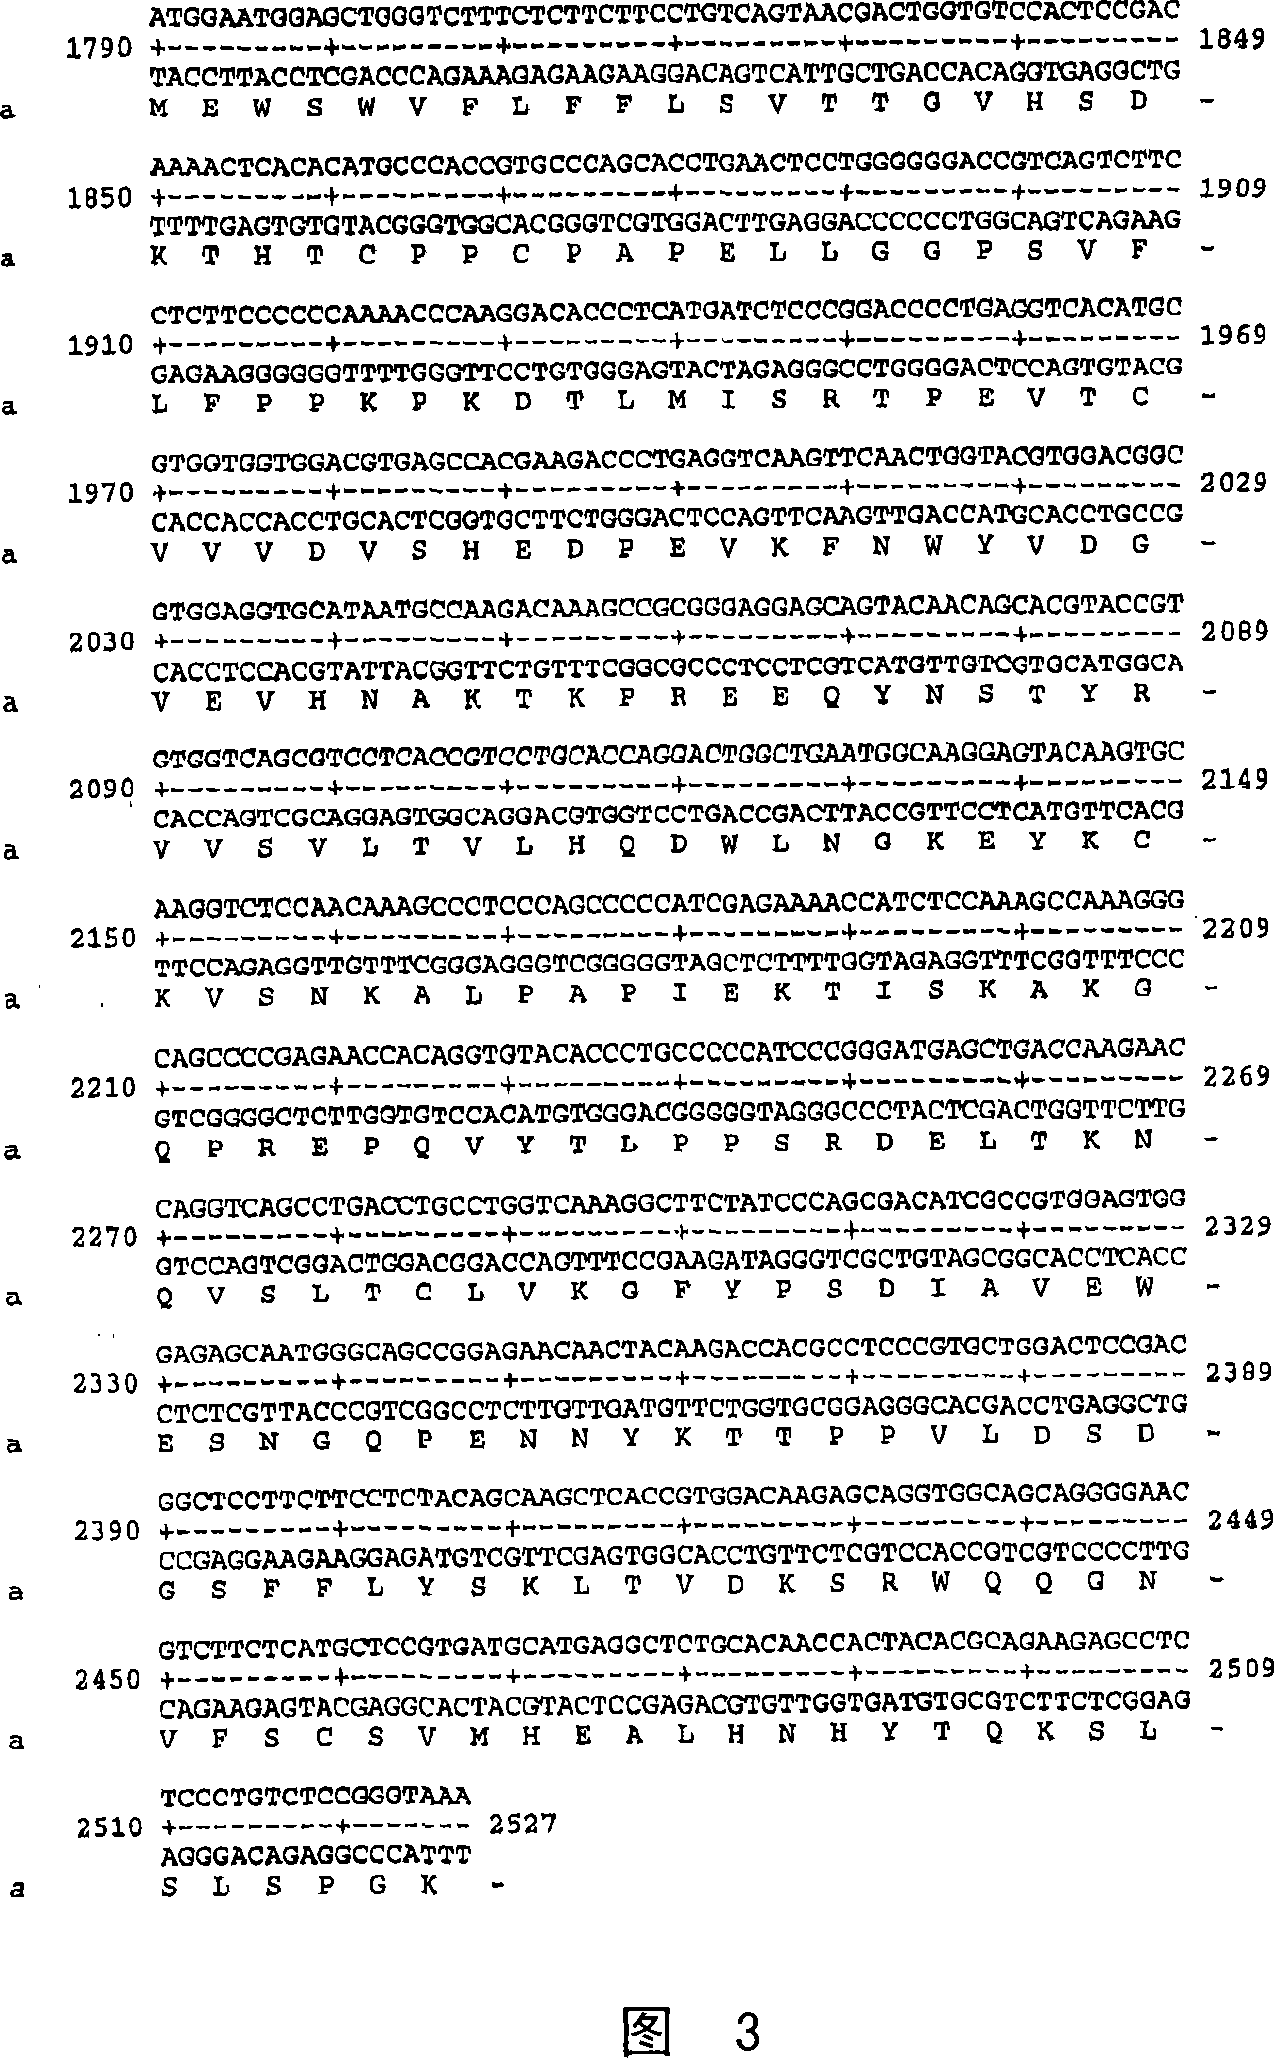 Toxin peptides with extended blood halflife